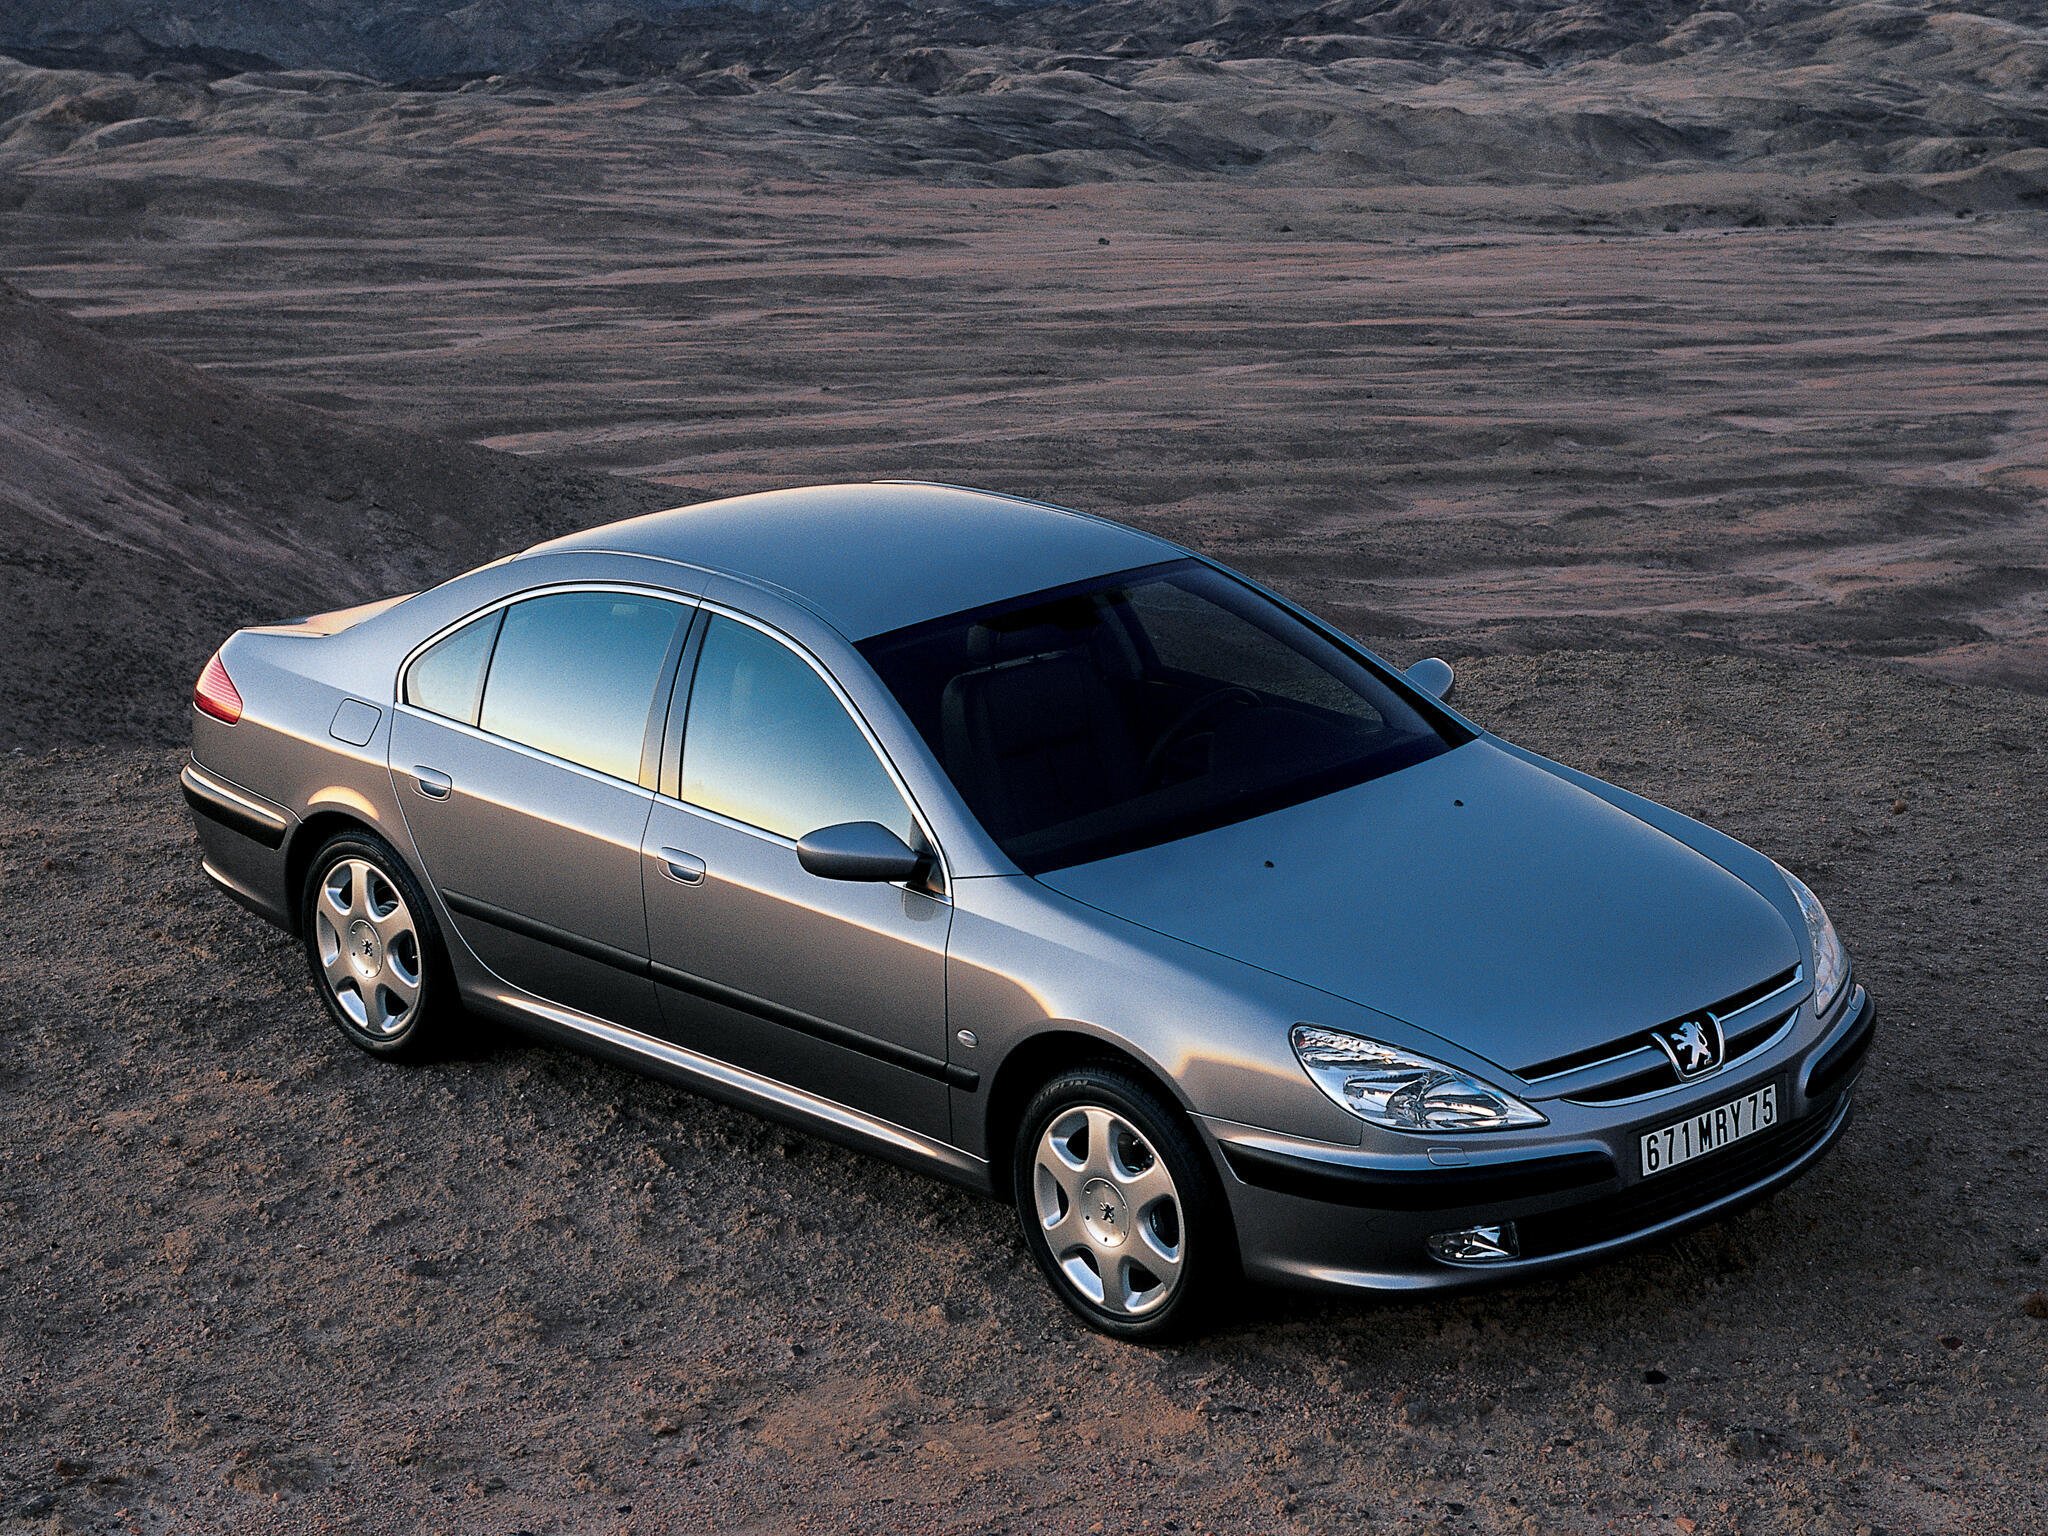 peugeot-607-1999-auto-forever